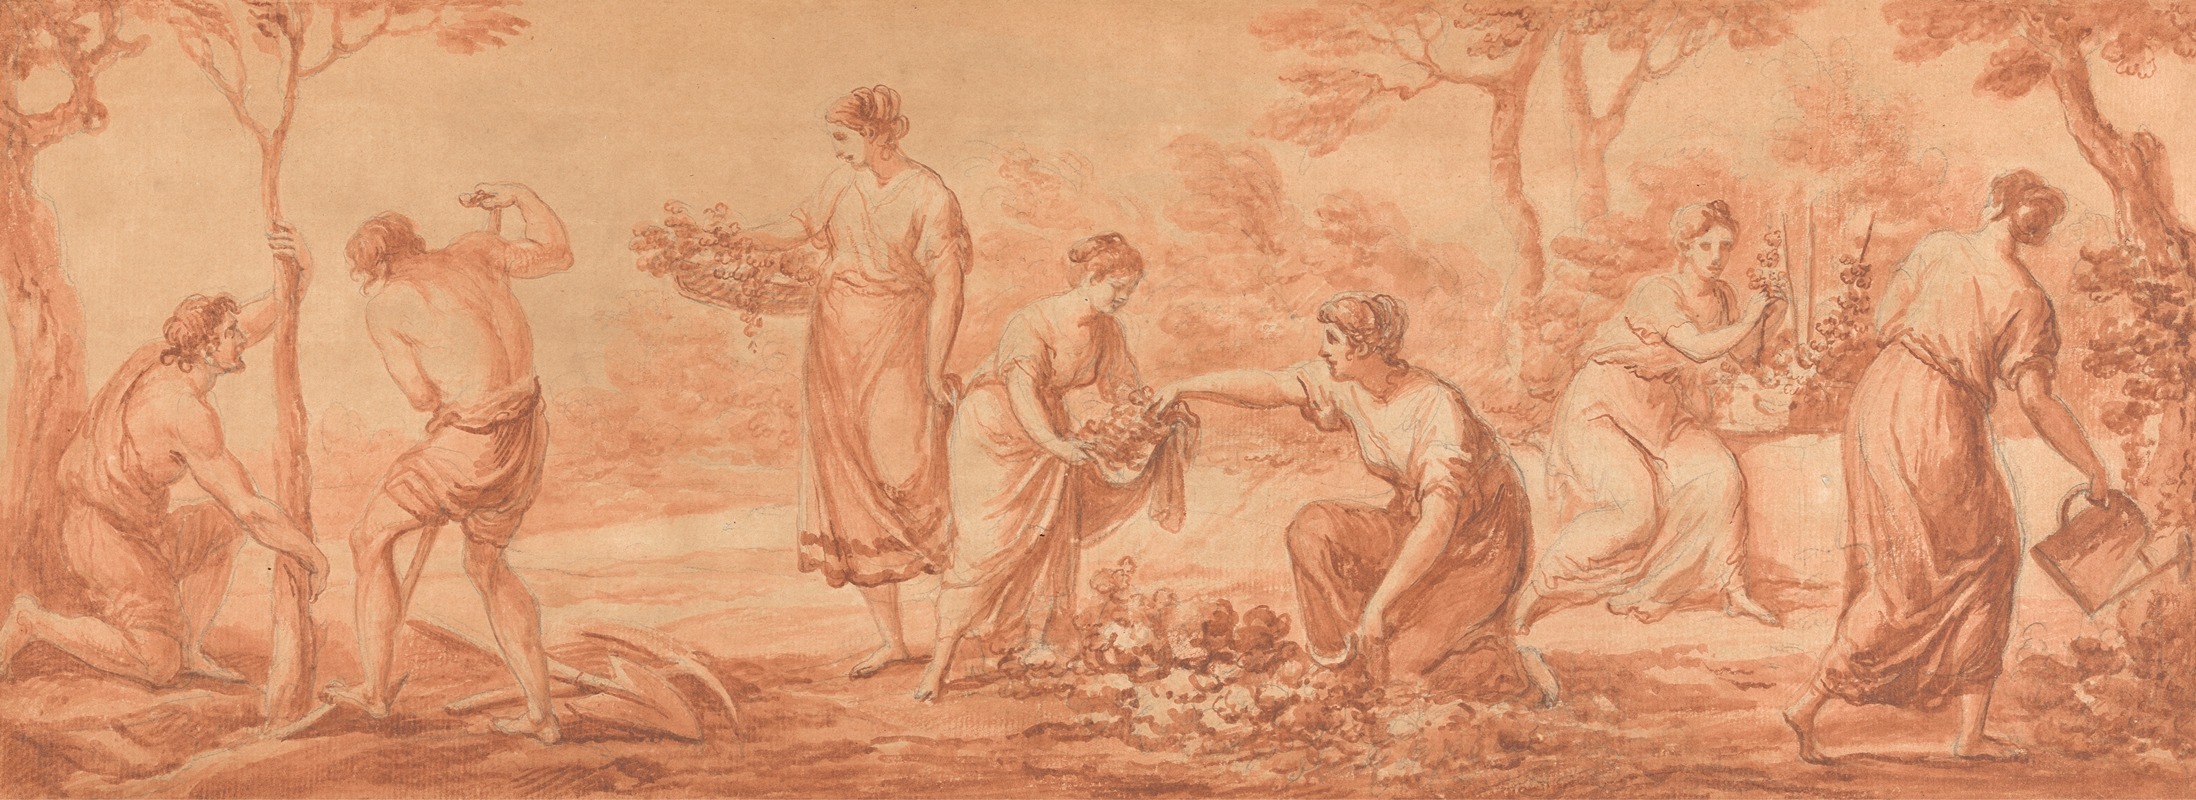 Angelica Kauffmann - A Frieze; Men Planting Trees, Women Gathering Blossoms and Watering Flowers